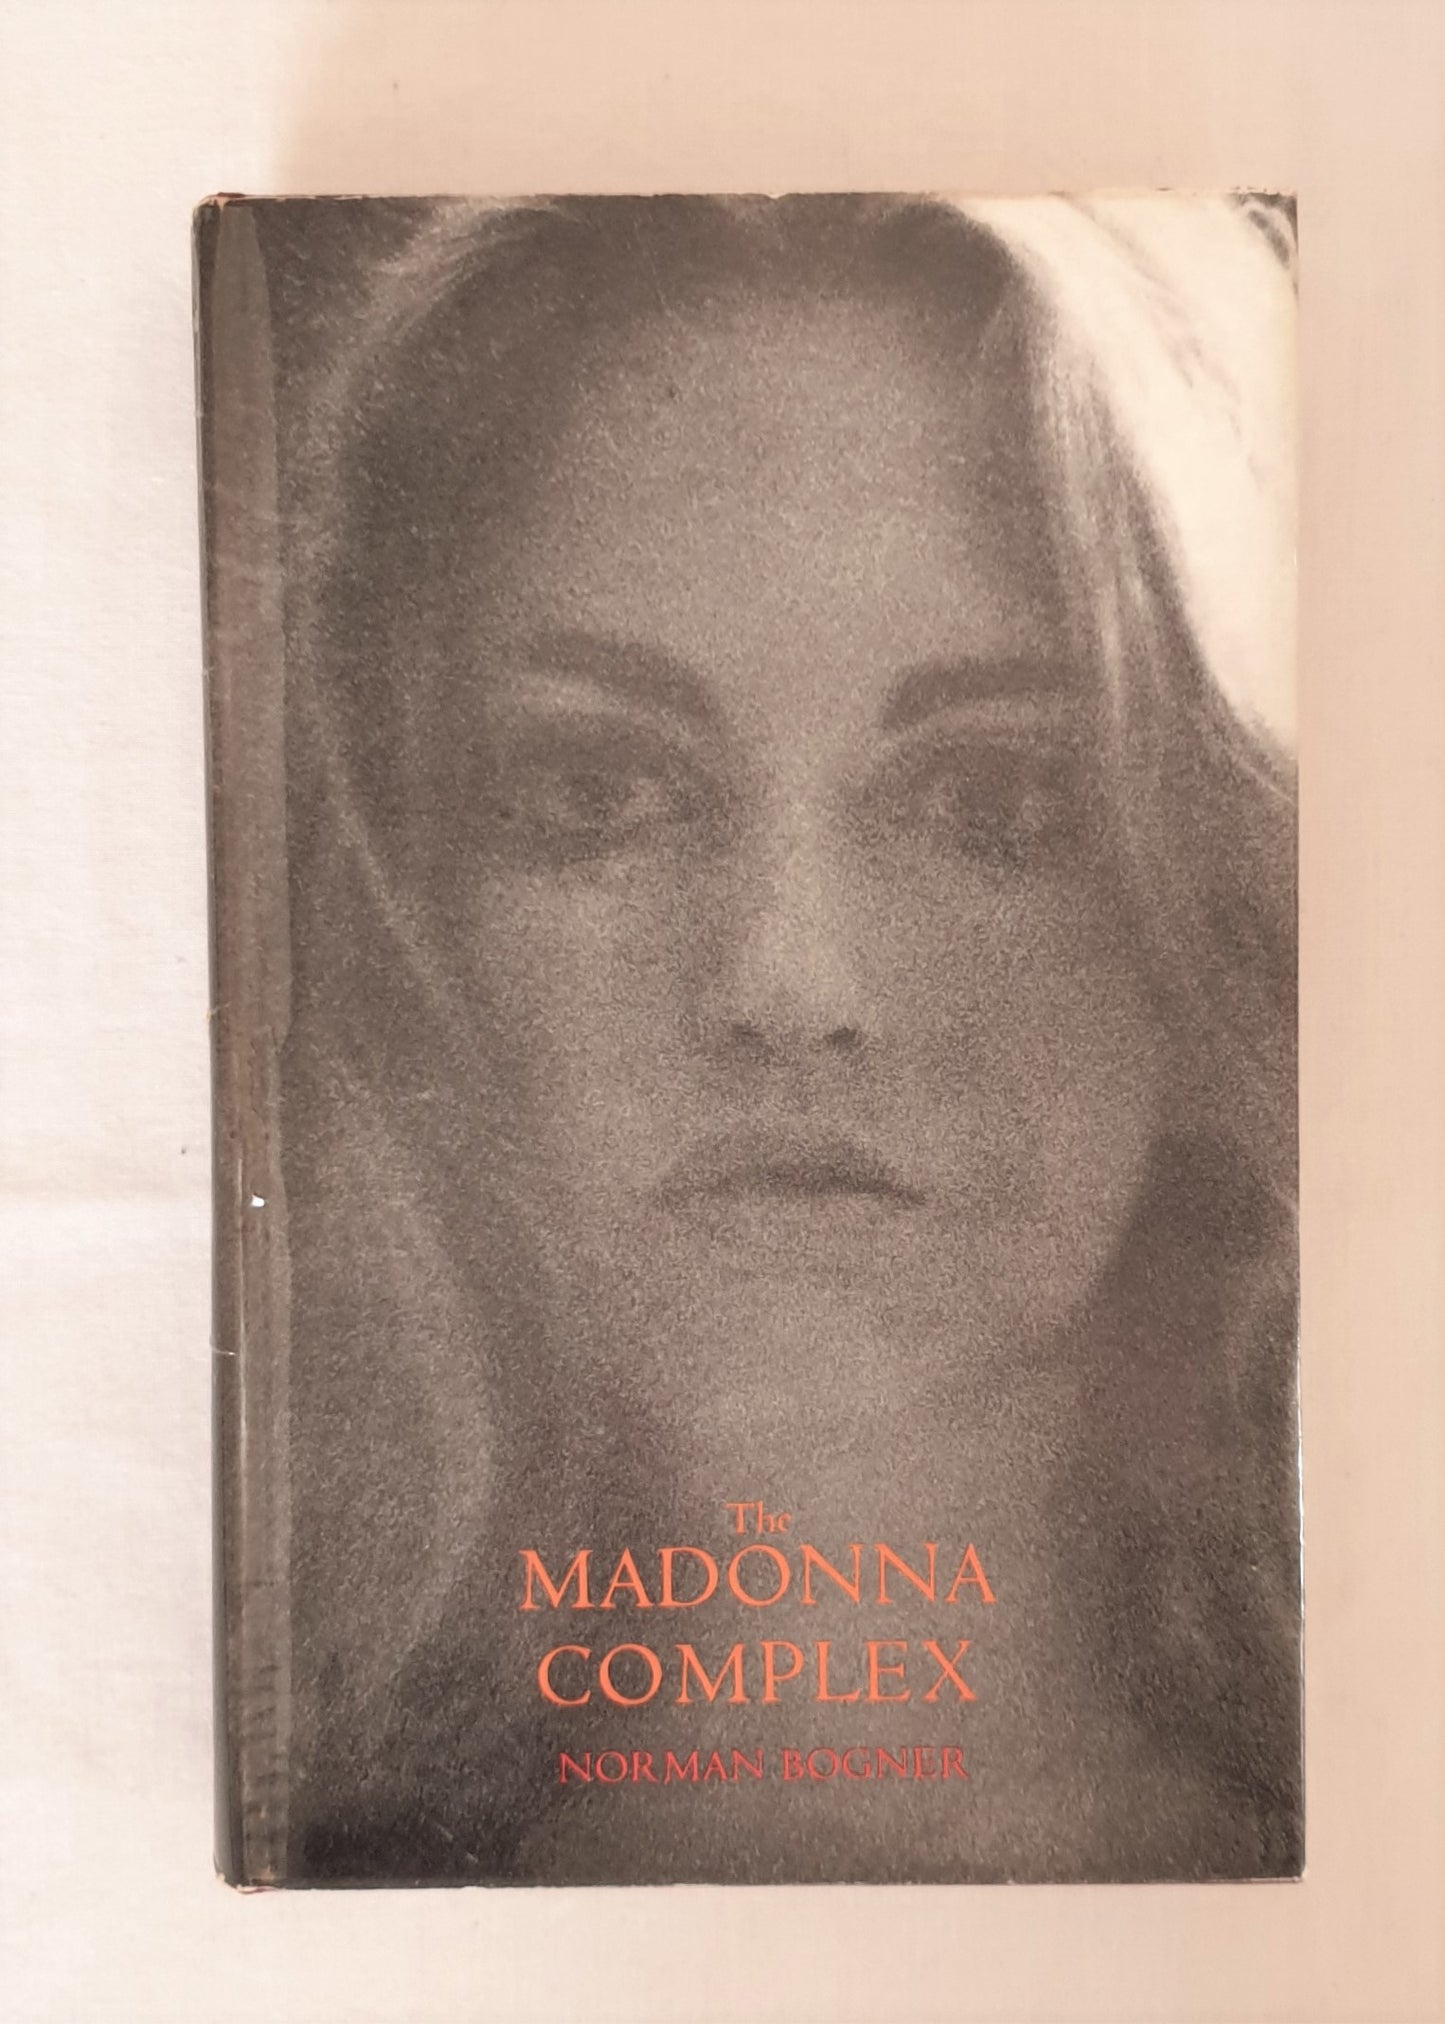 The Madonna Complex by Norman Bogner